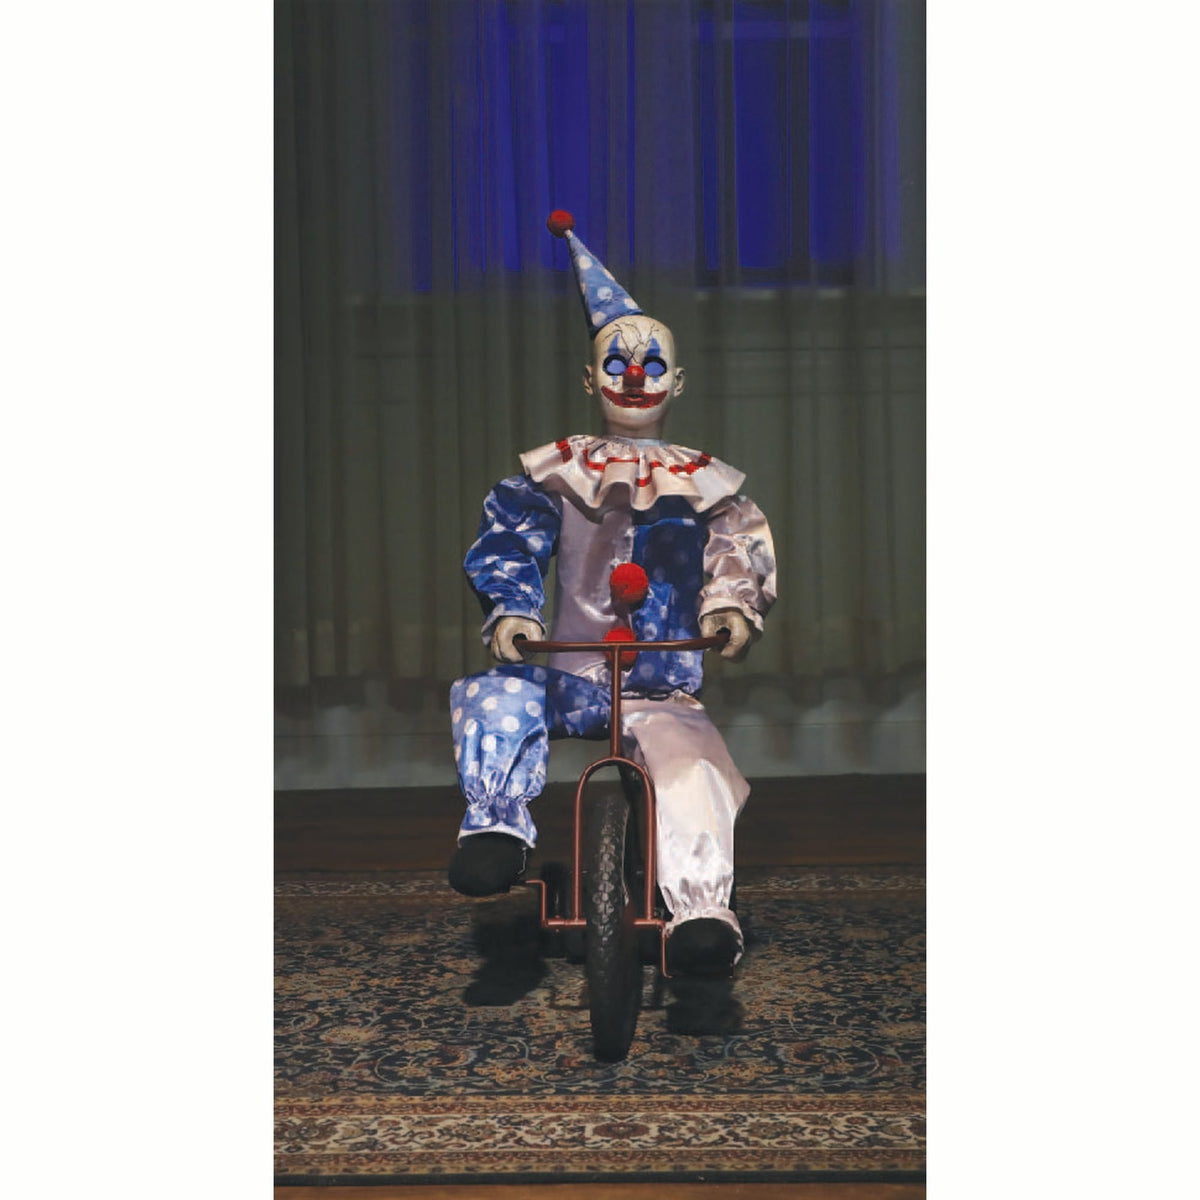 MORRIS COSTUMES Halloween Tricycle Clown Doll, 32 Inches, 1 Count